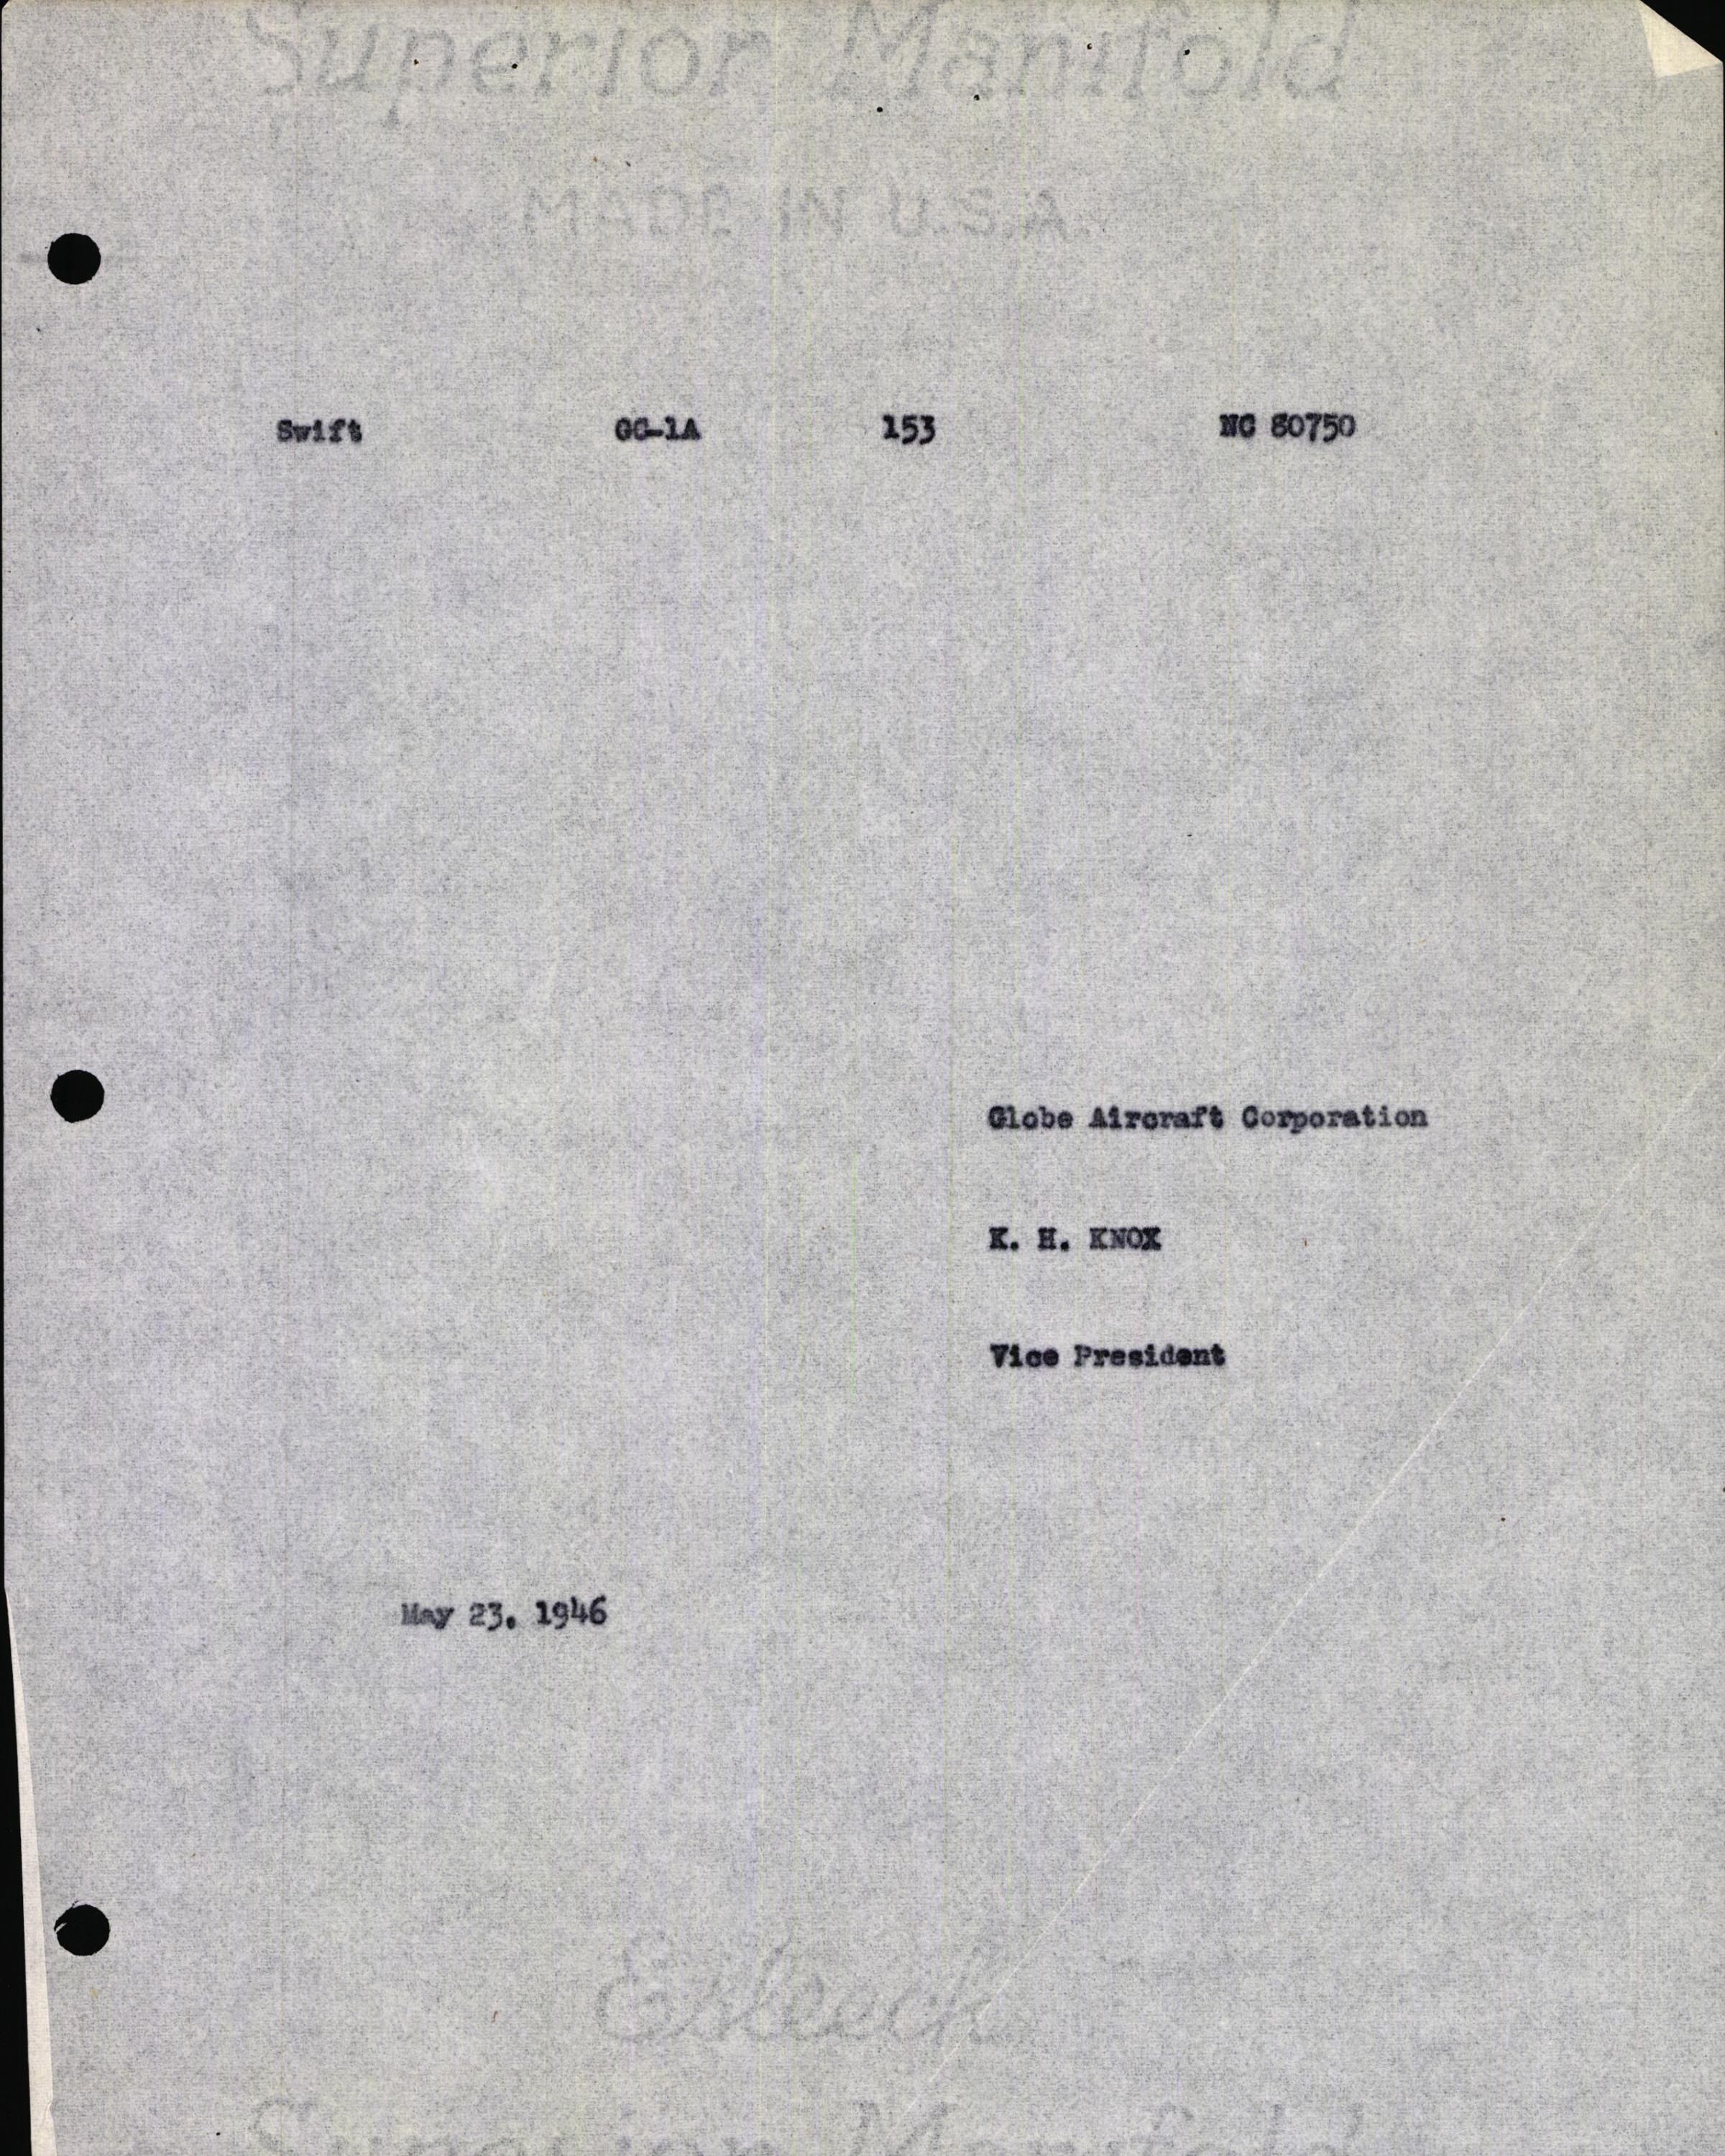 Sample page 7 from AirCorps Library document: Technical Information for Serial Number 153